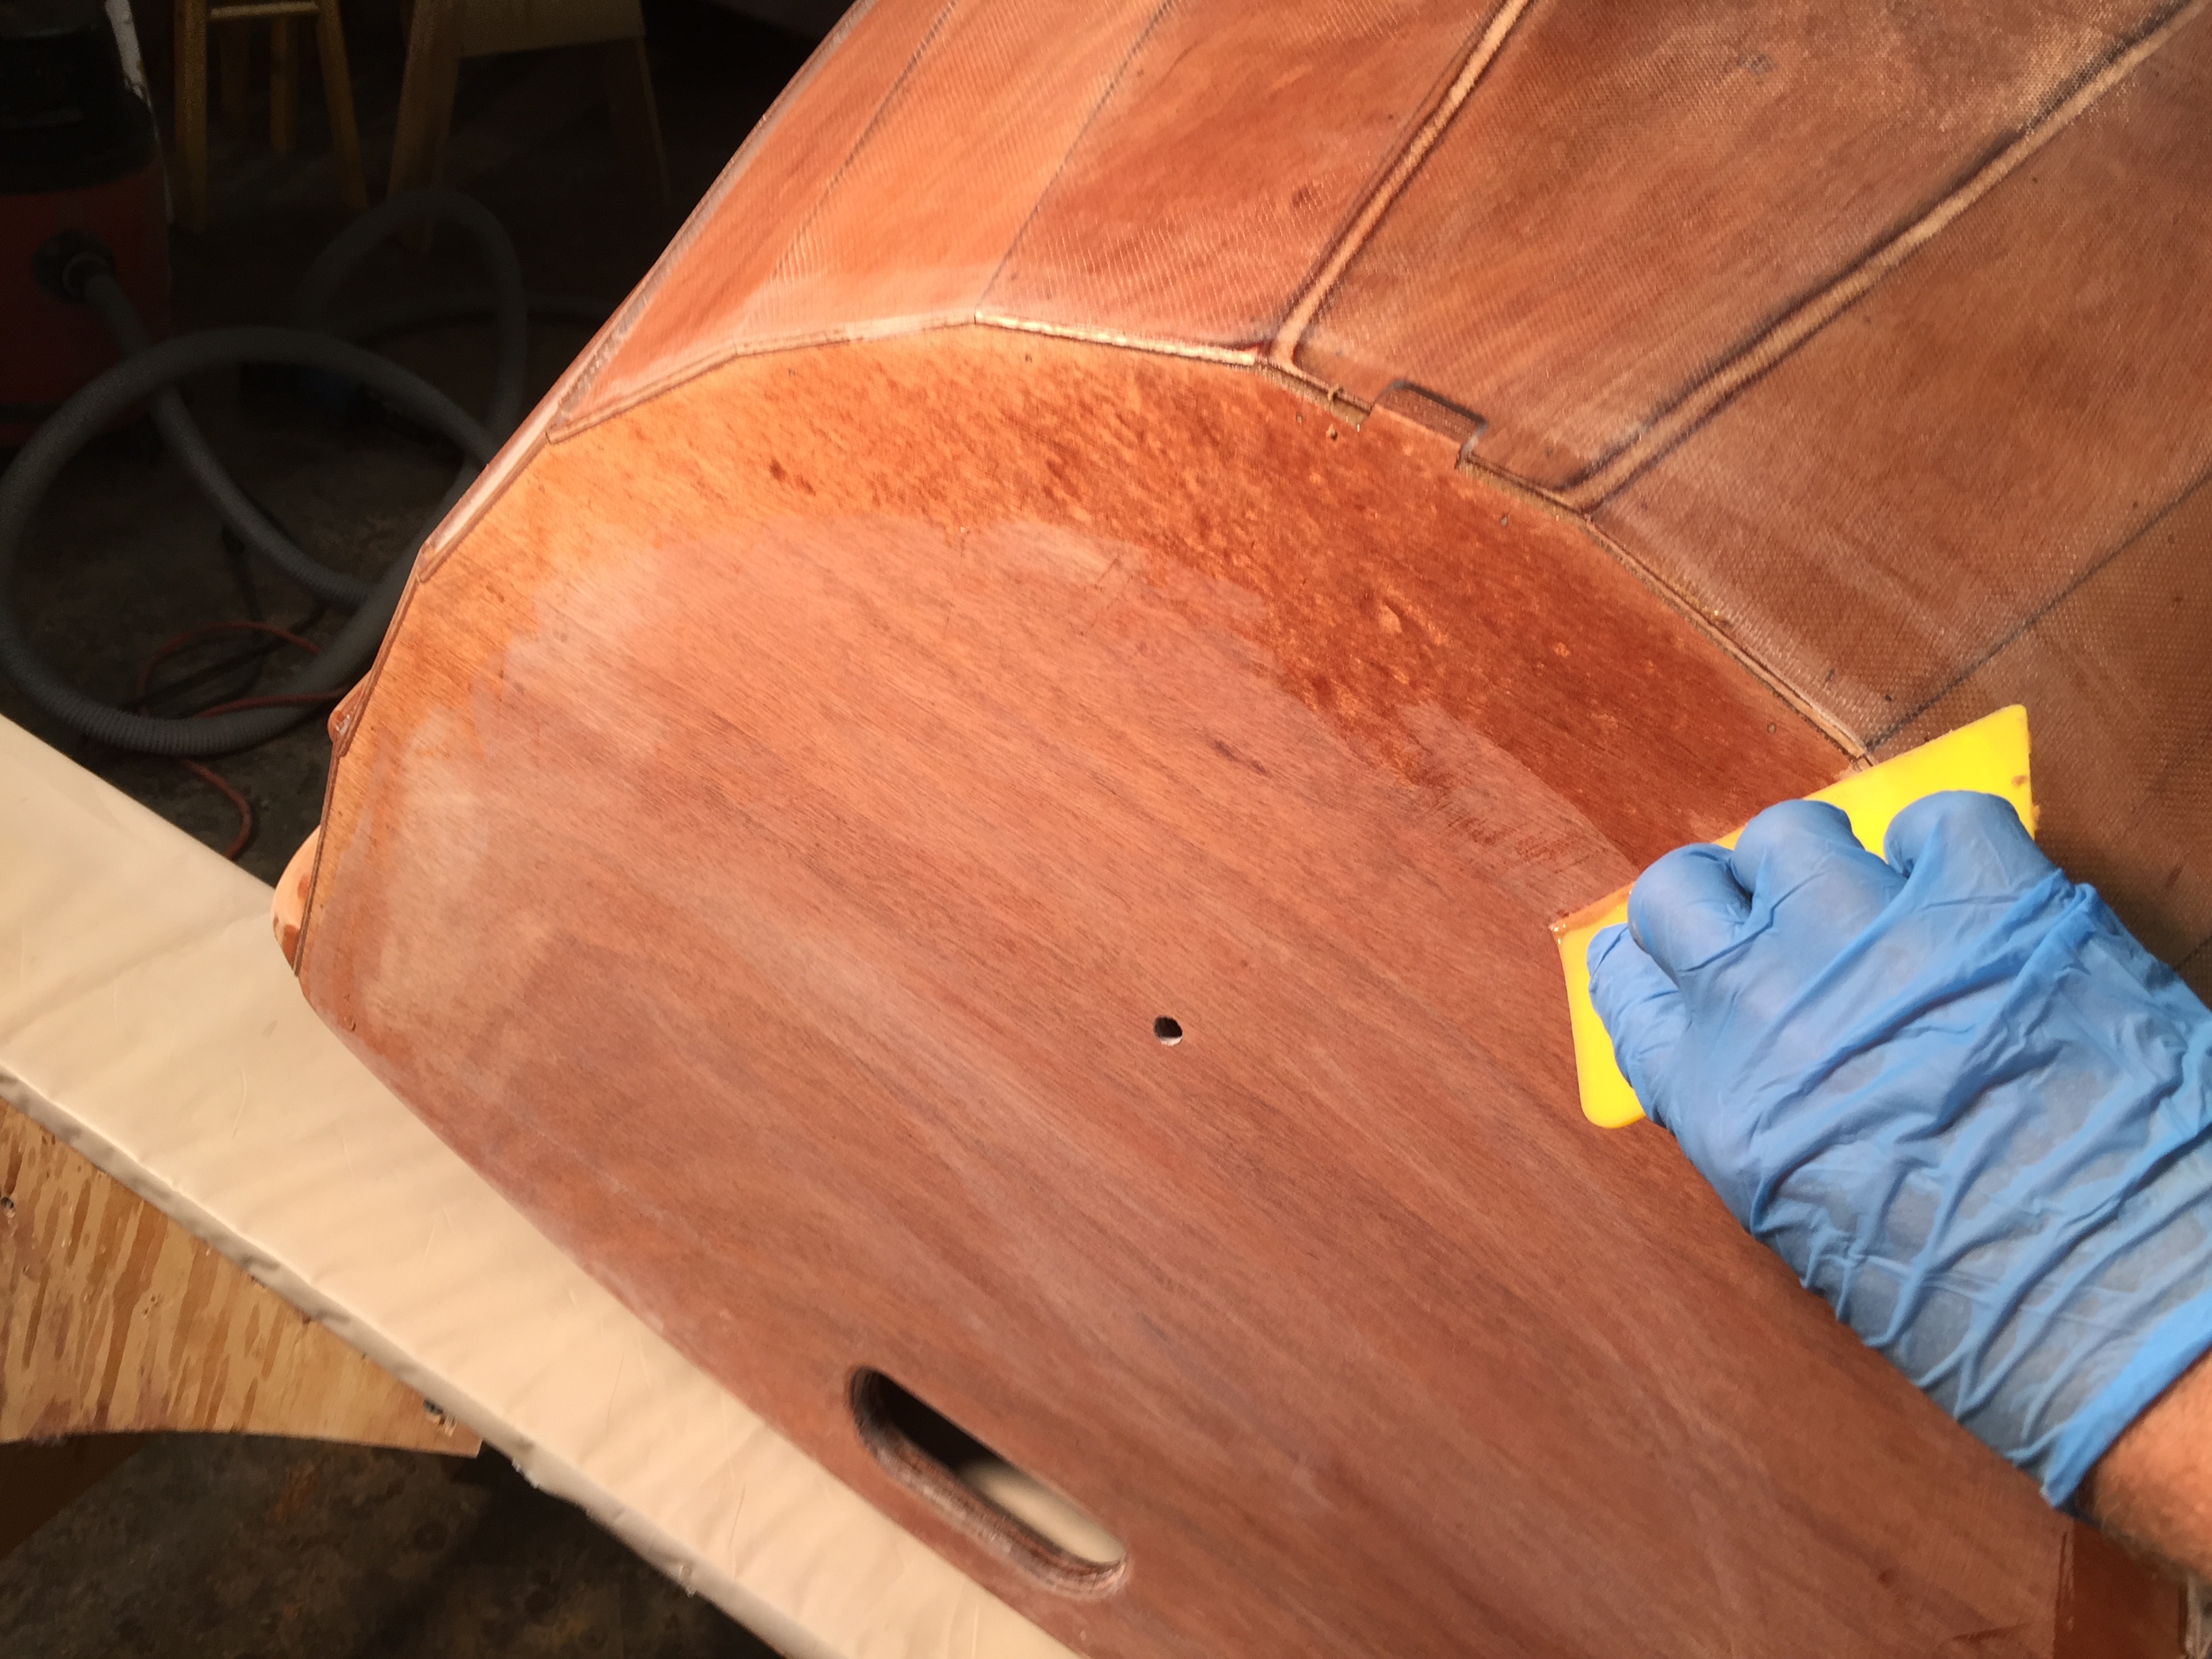 CLC Ultralight Dinghy - Cleaning up wood putty